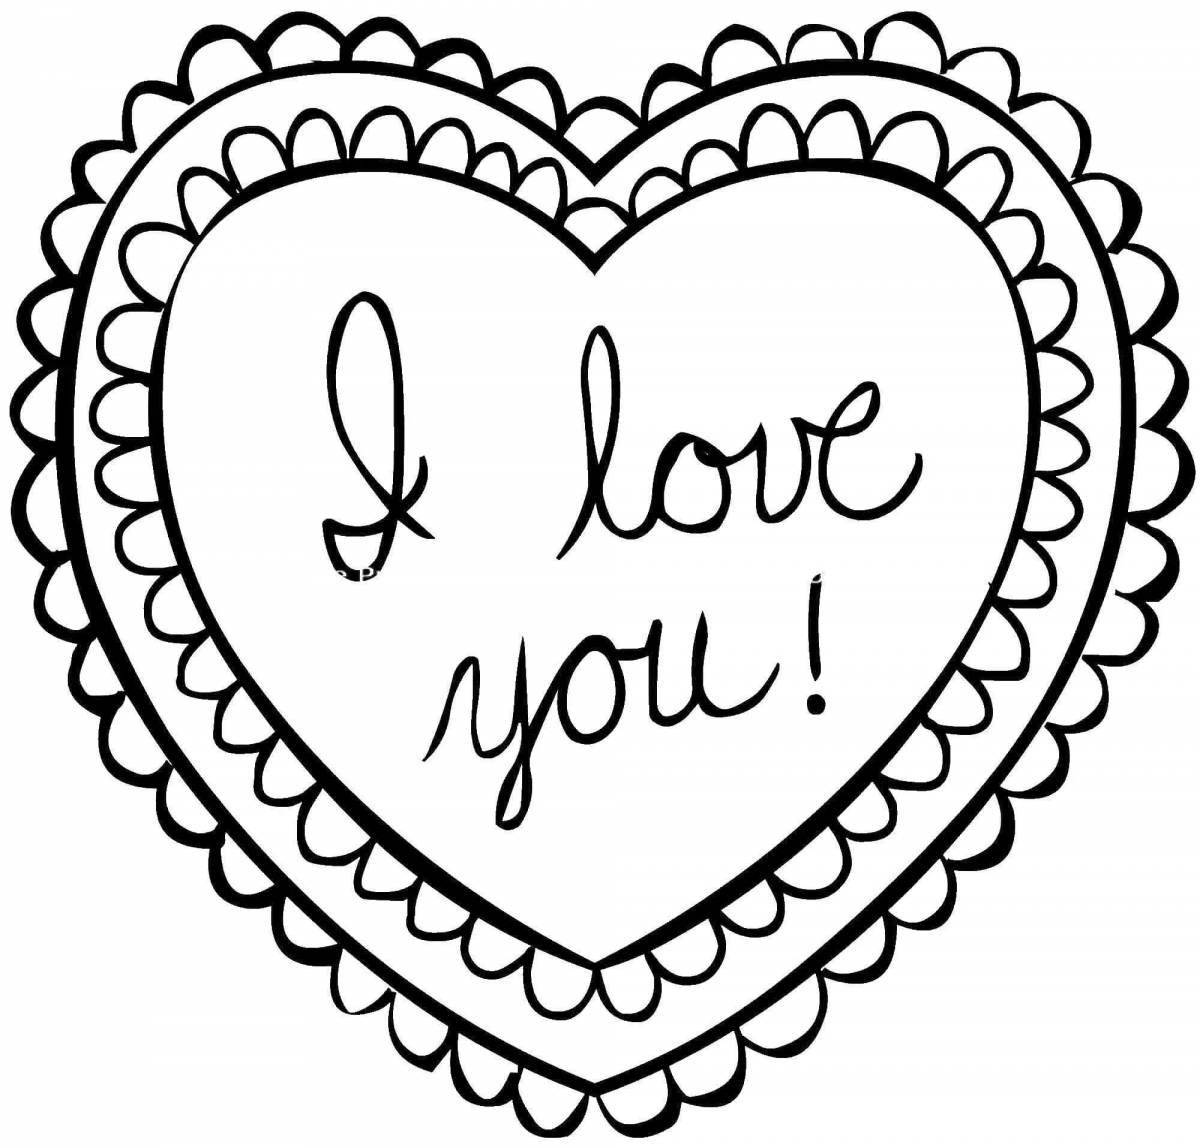 Luminous valentines coloring pages for valentine's day for kids